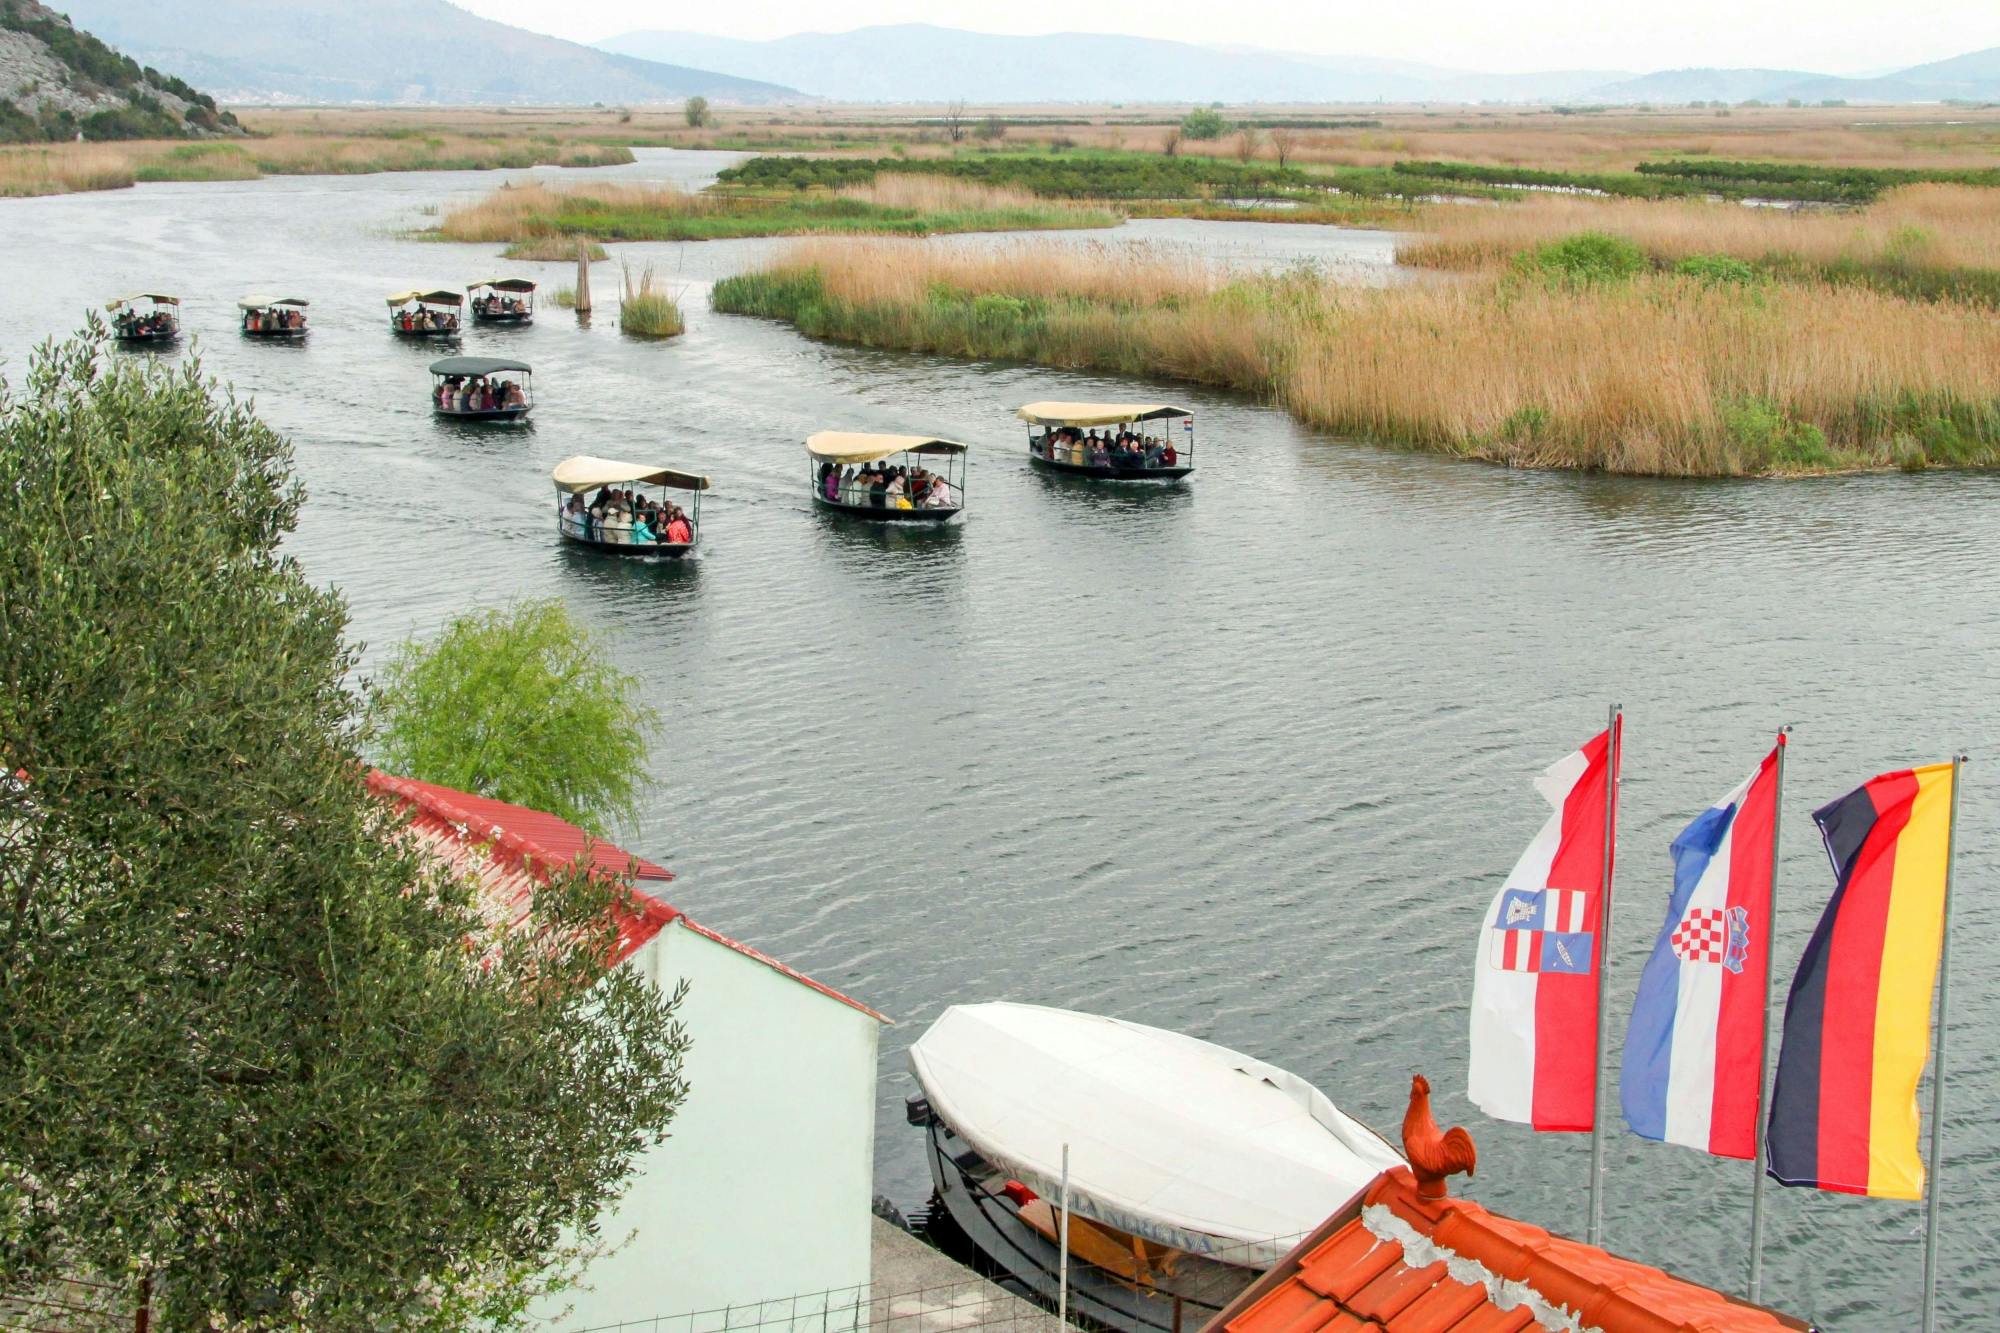 River Neretva Boat Tour with Lunch and Slano Village